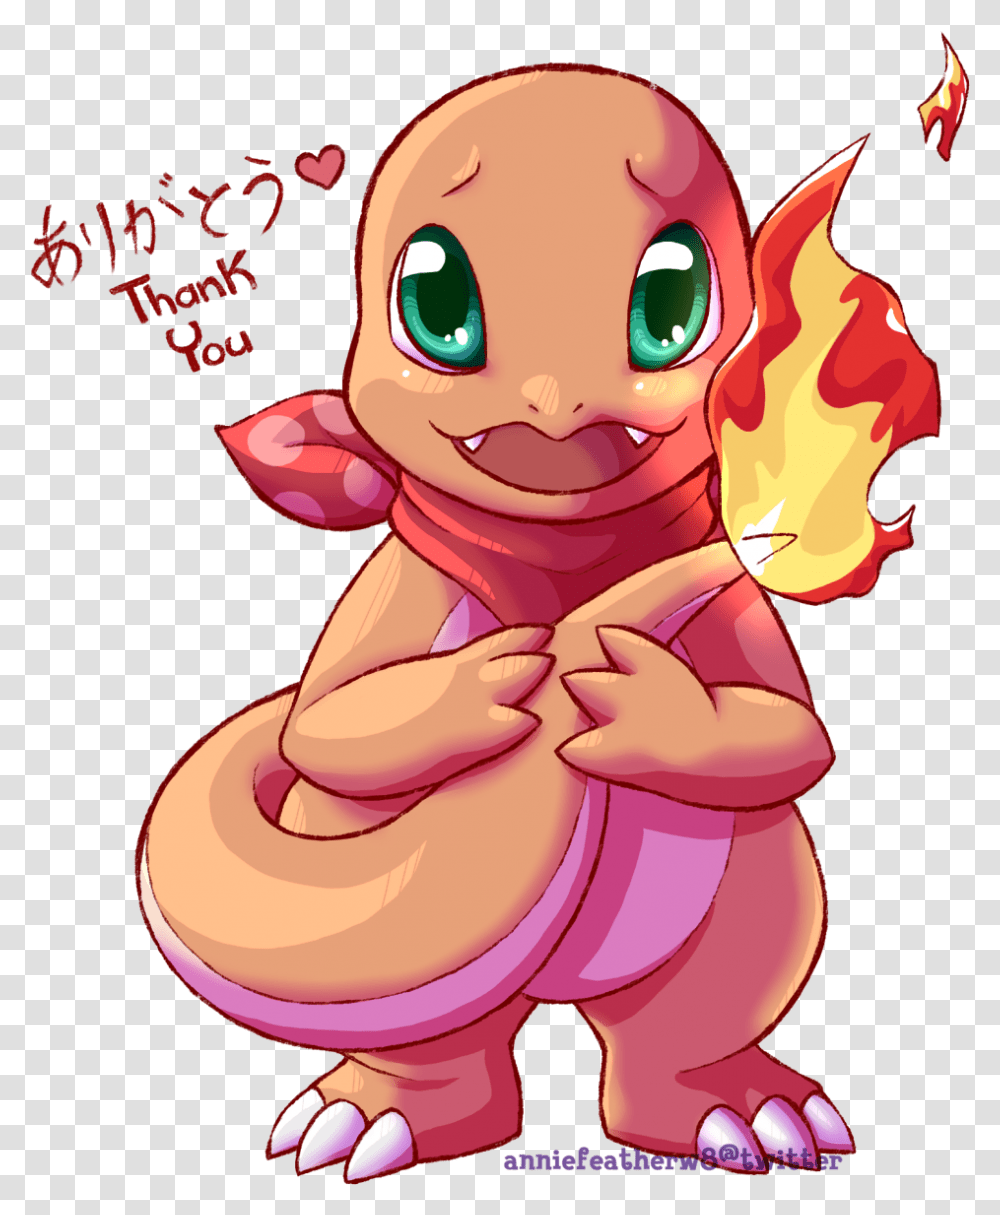 Charmander Thank You By Anniefeatherw8 Pokemon Thank You Art, Toy, Diwali, Face, Cupid Transparent Png